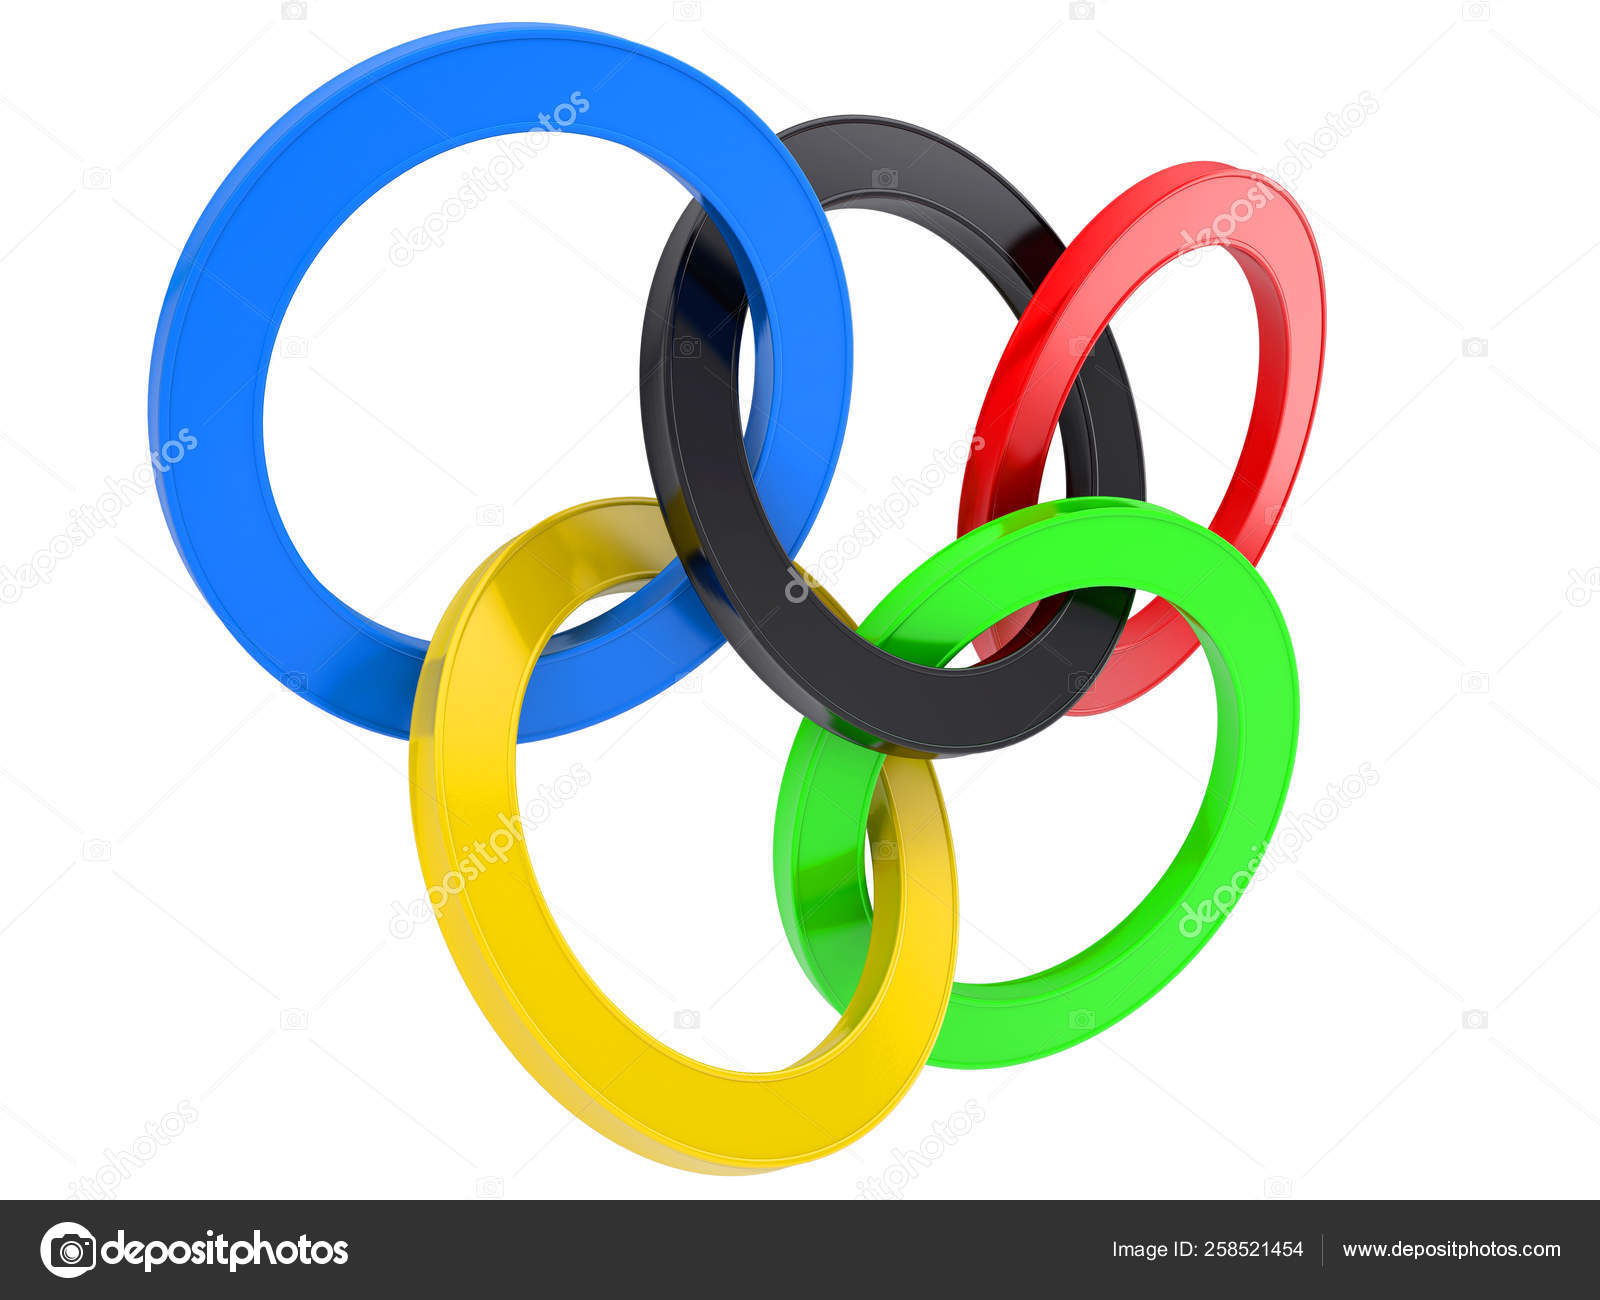 Olympic Rings Isol: Over 571 Royalty-Free Licensable Stock Photos |  Shutterstock